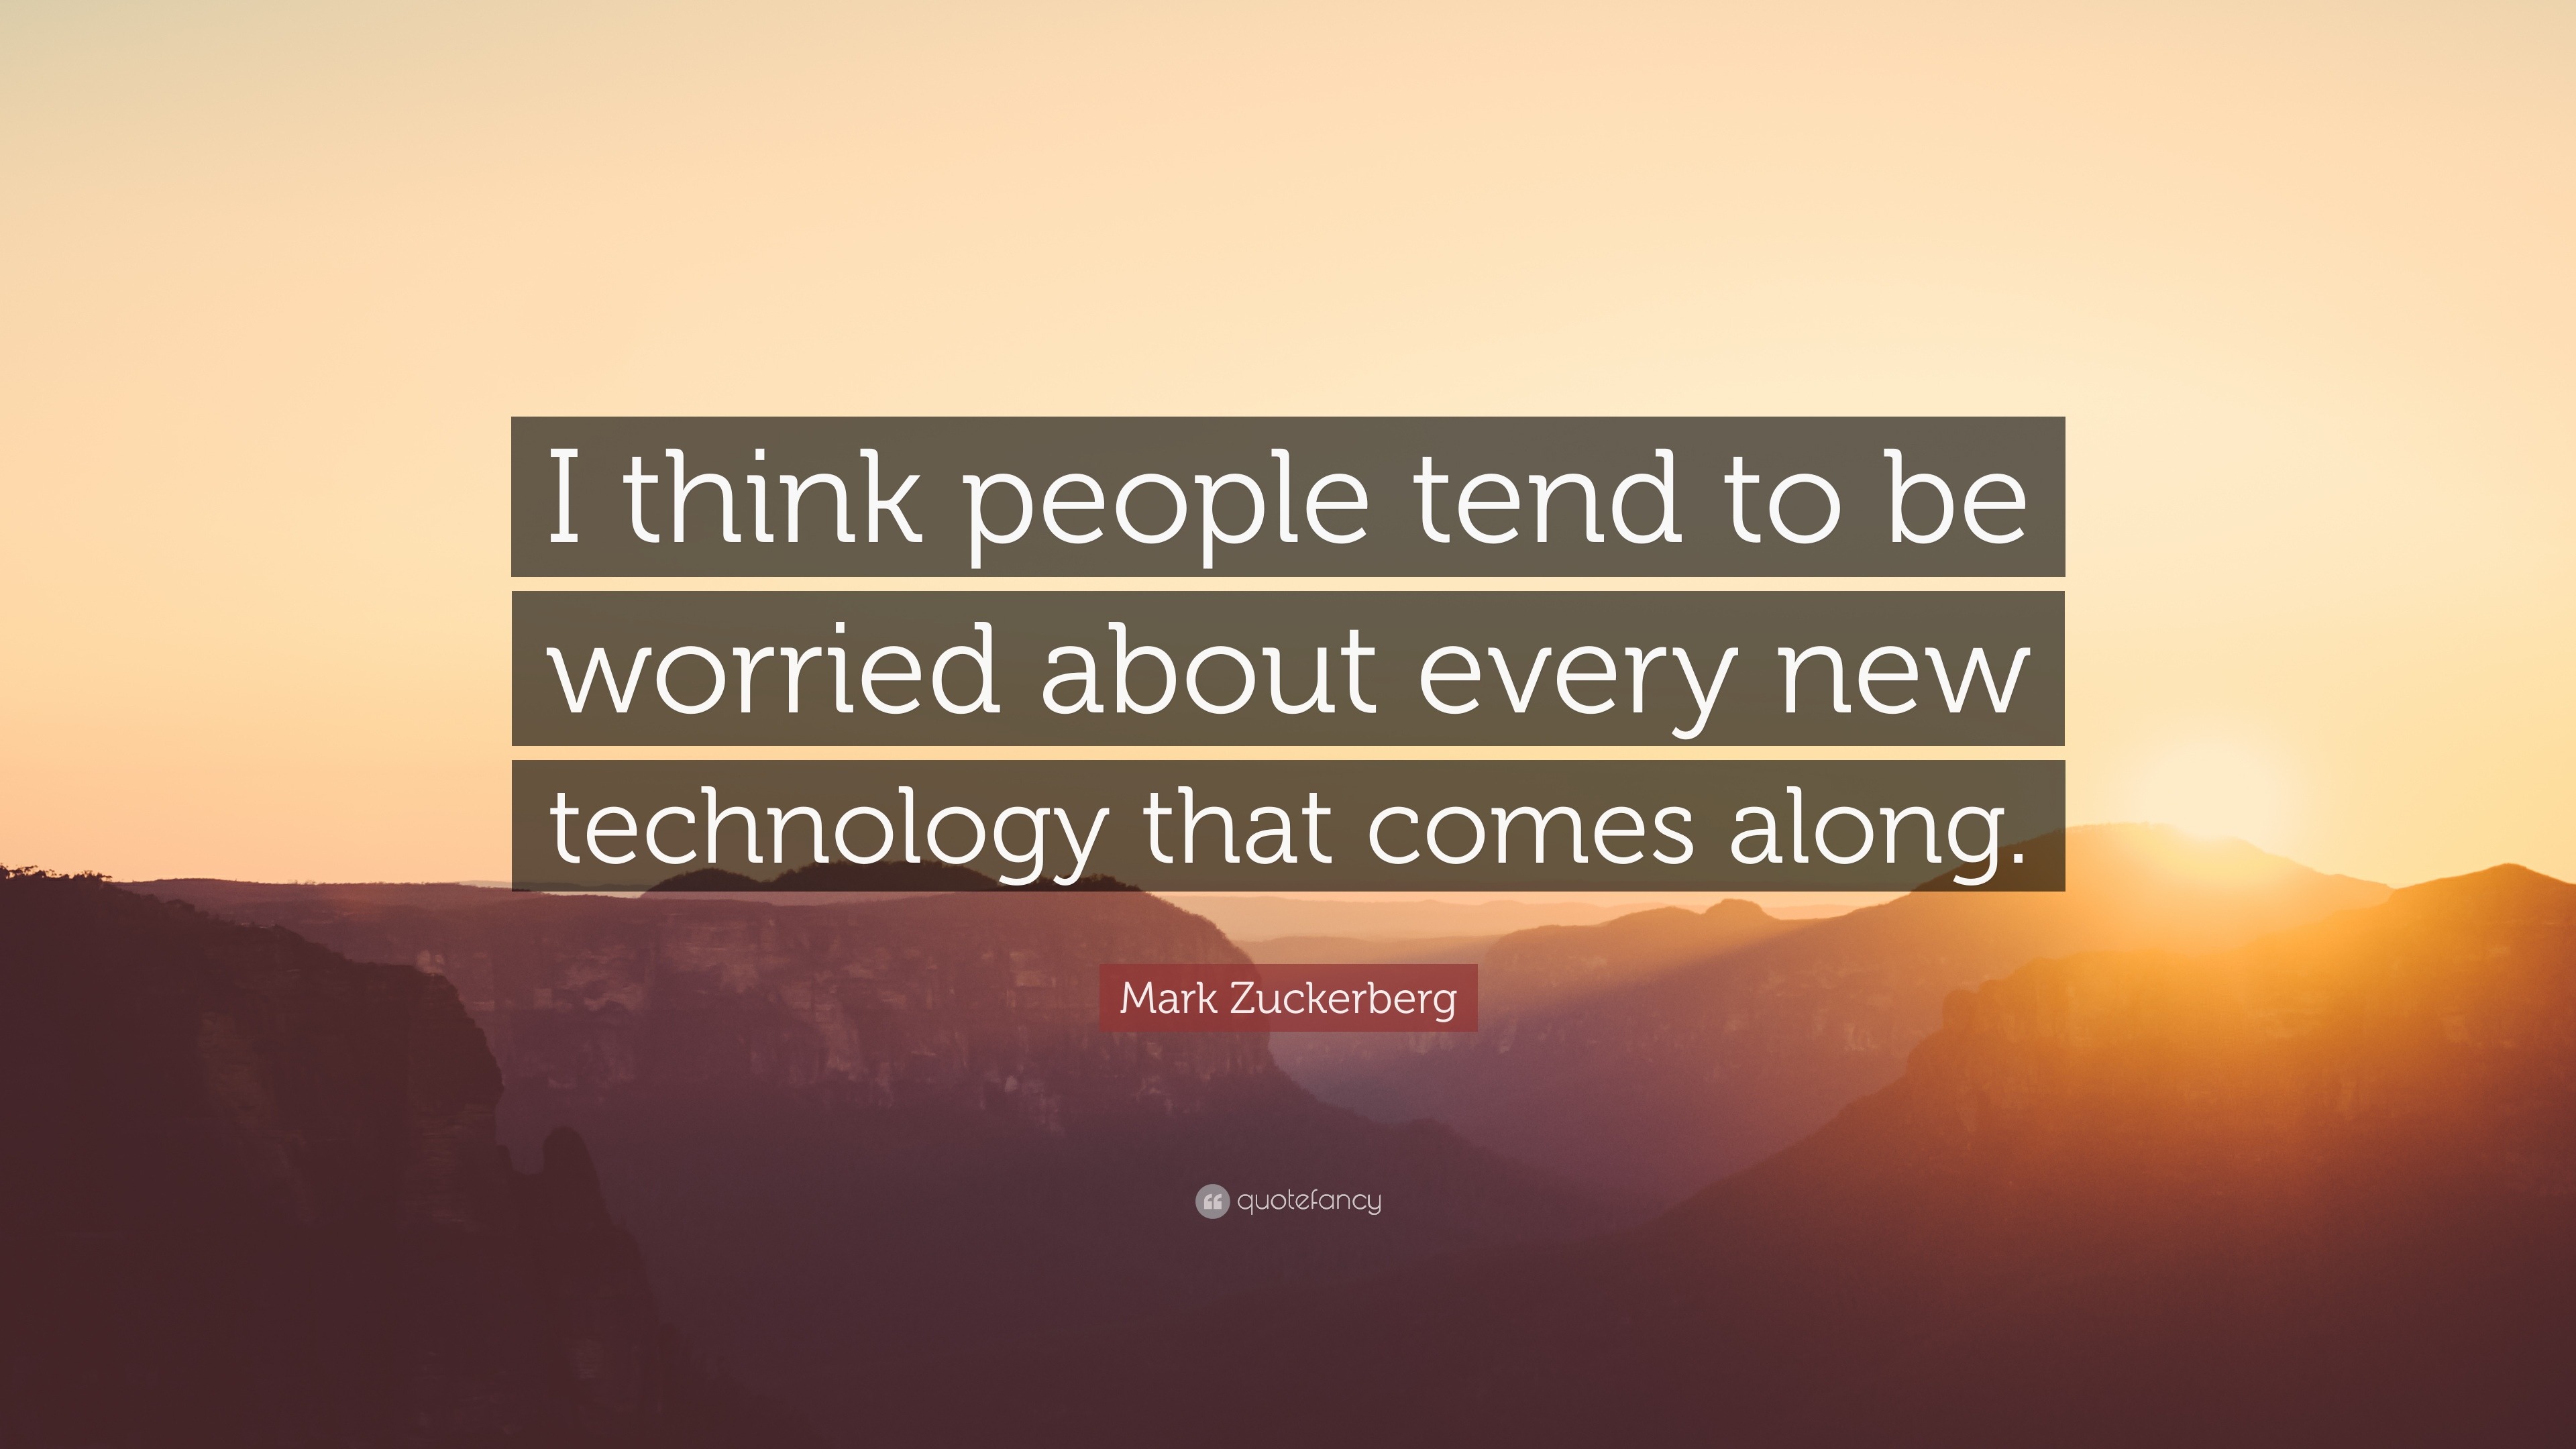 Mark Zuckerberg Quote: “I think people tend to be worried about every ...